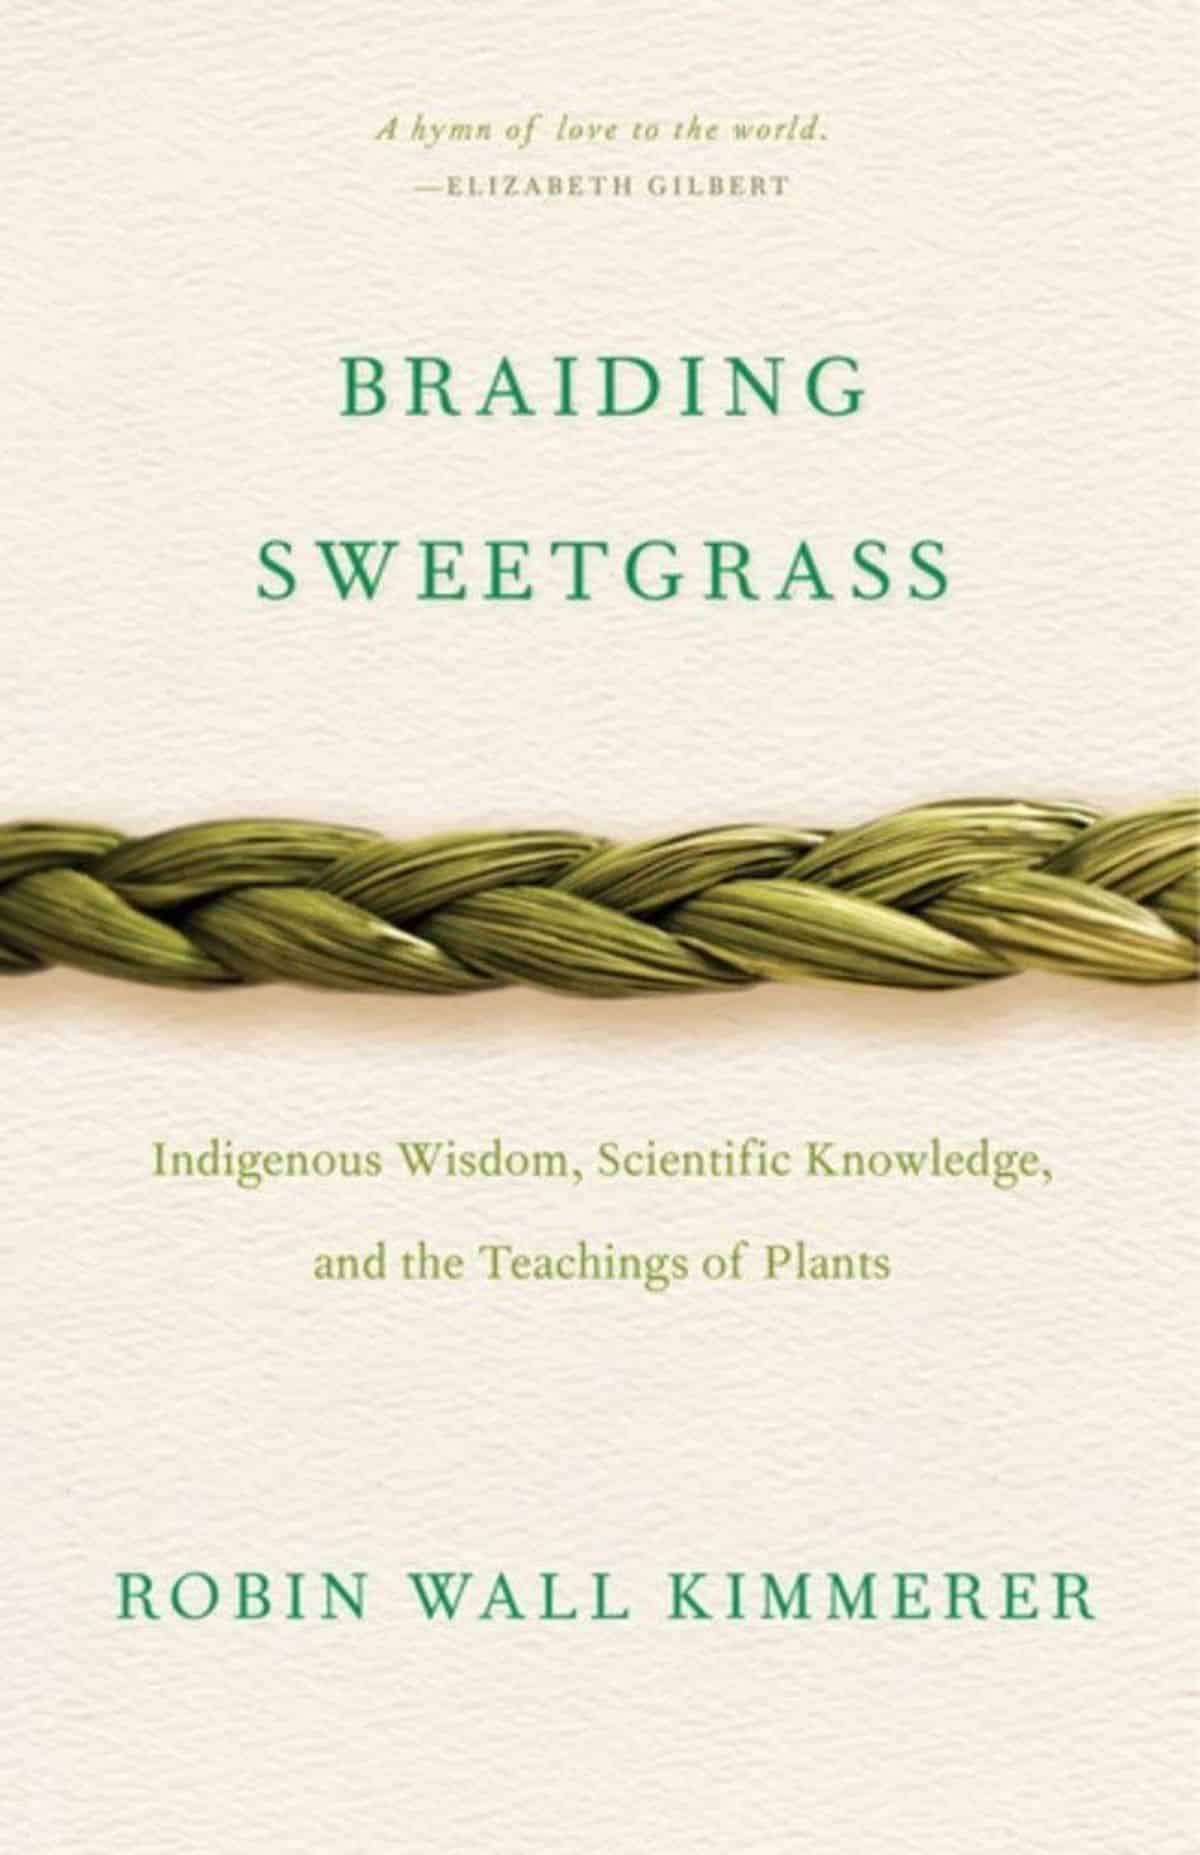 Picture of the cover of the book Braiding Sweetgrass" by Robin Wall Kimmerer.